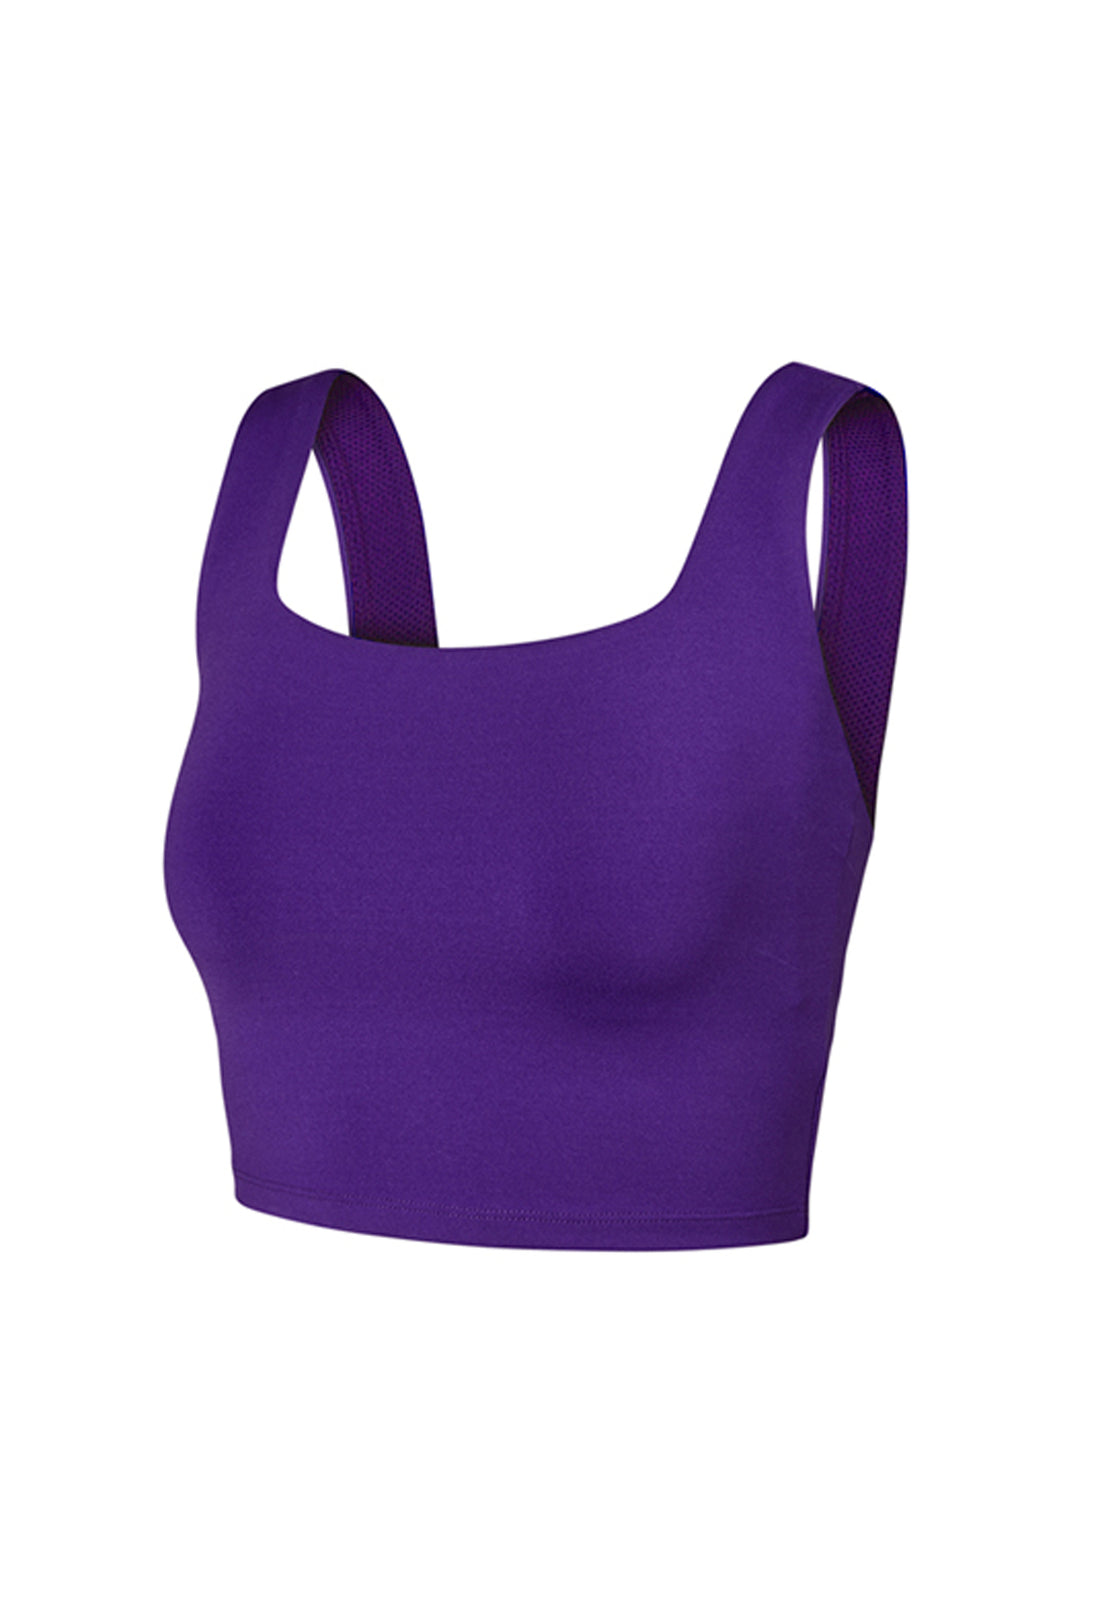 XELLA Intention Bra Top - Ultra Violet (Clearance)